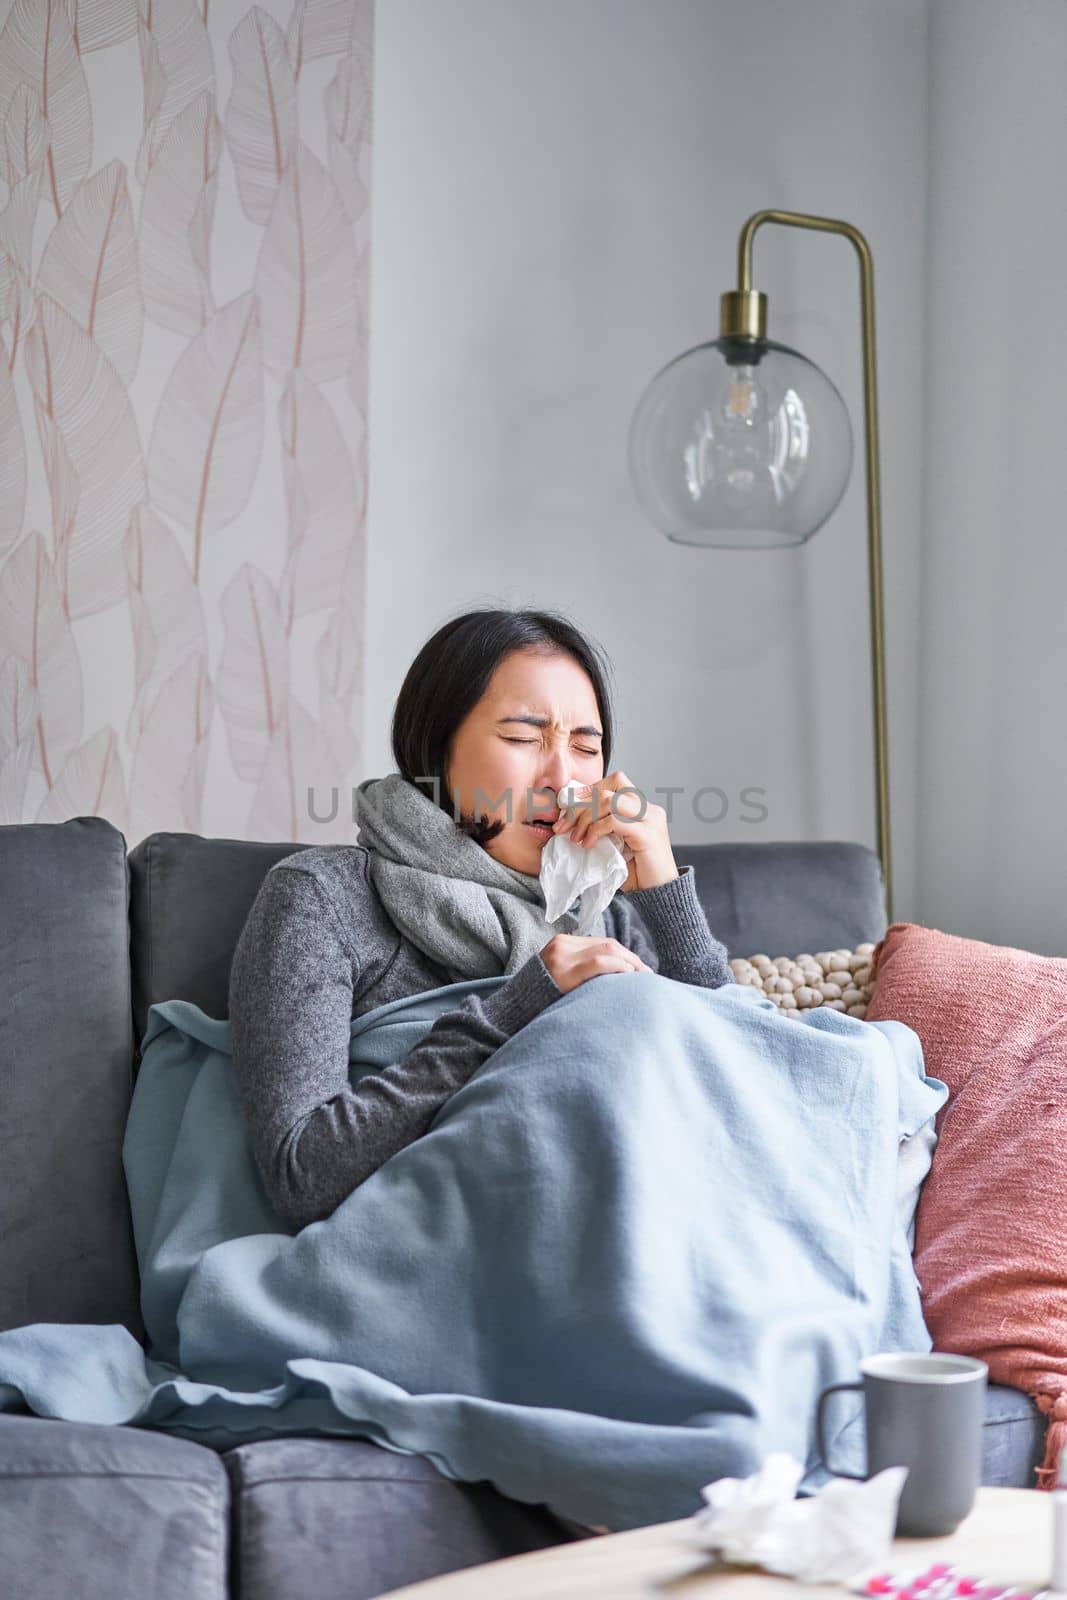 Korean woman feels unwell, sneezing and coughing, catching cold, staying at home with fever and temperature, taking medication.